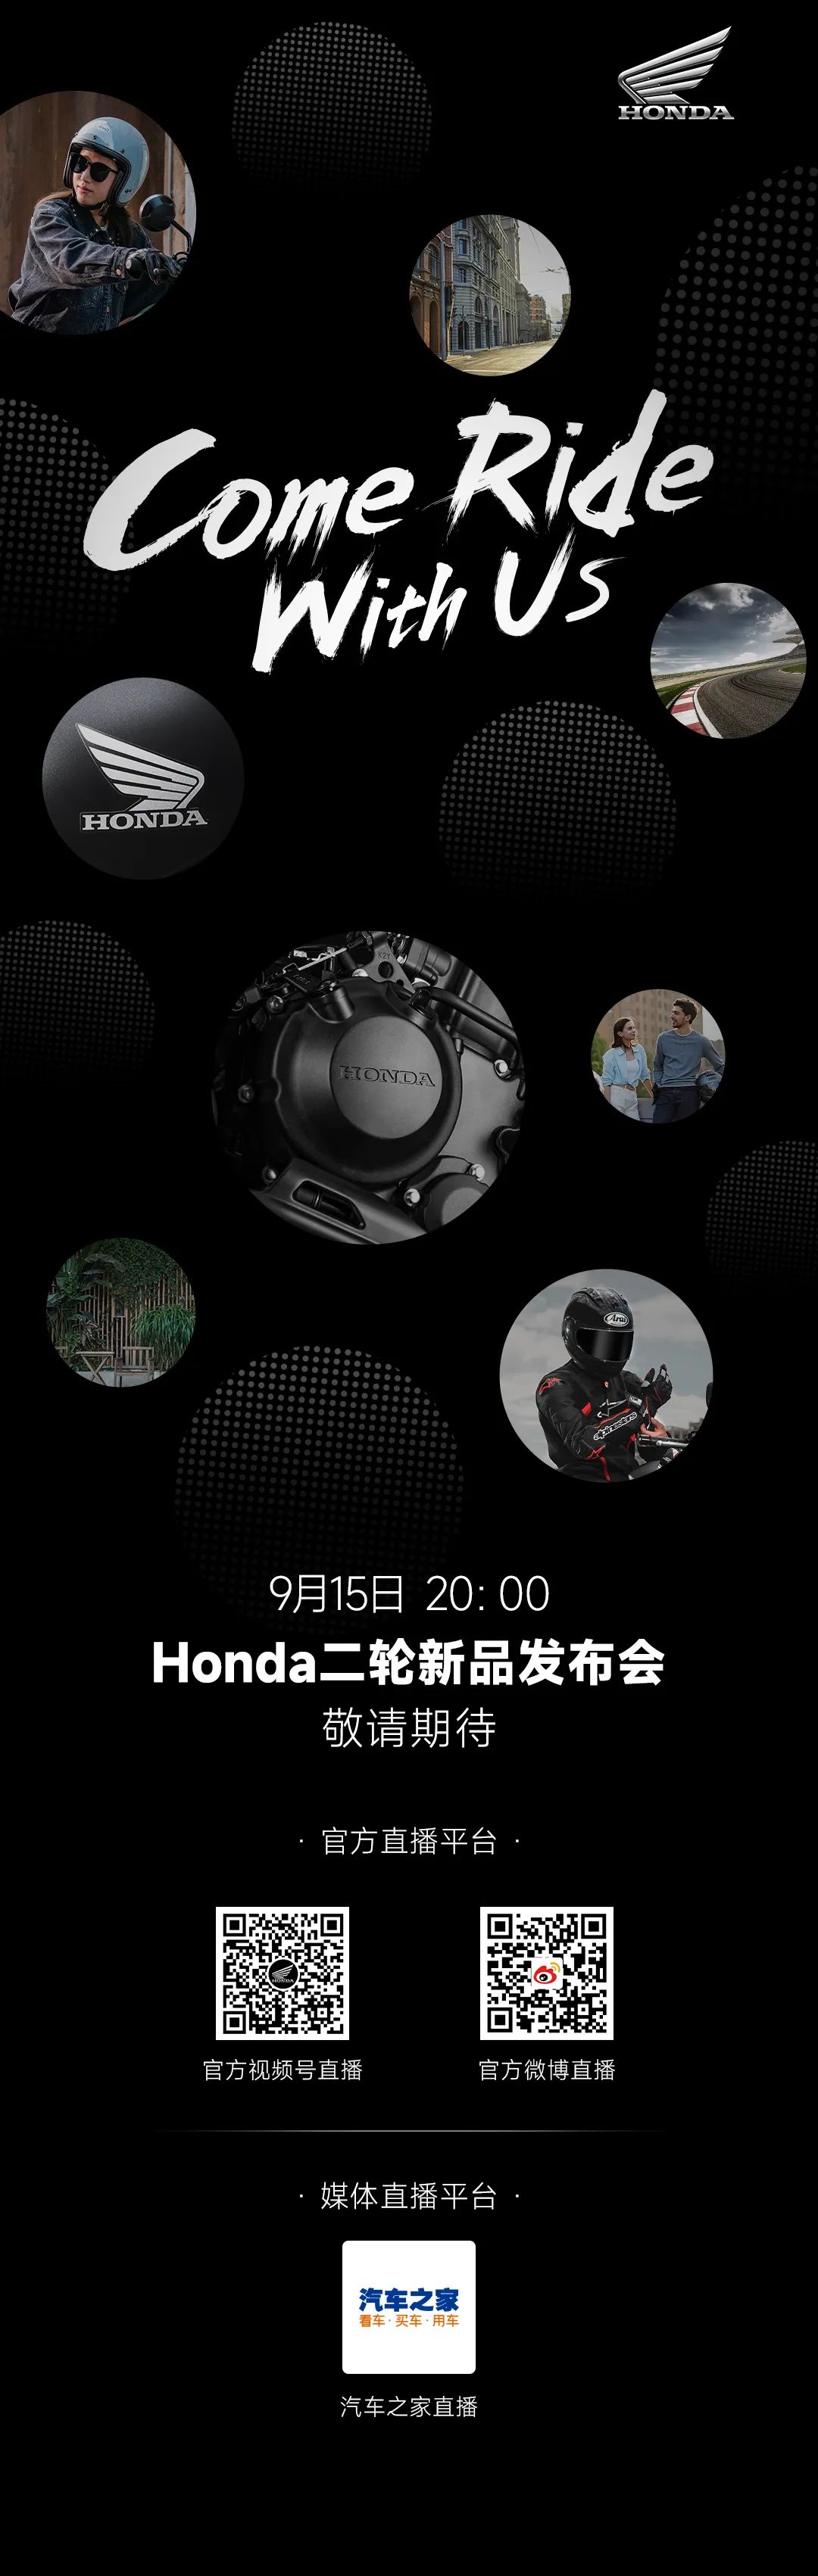 Come Ride With Us！Honda二輪新品發布會敬請期待！